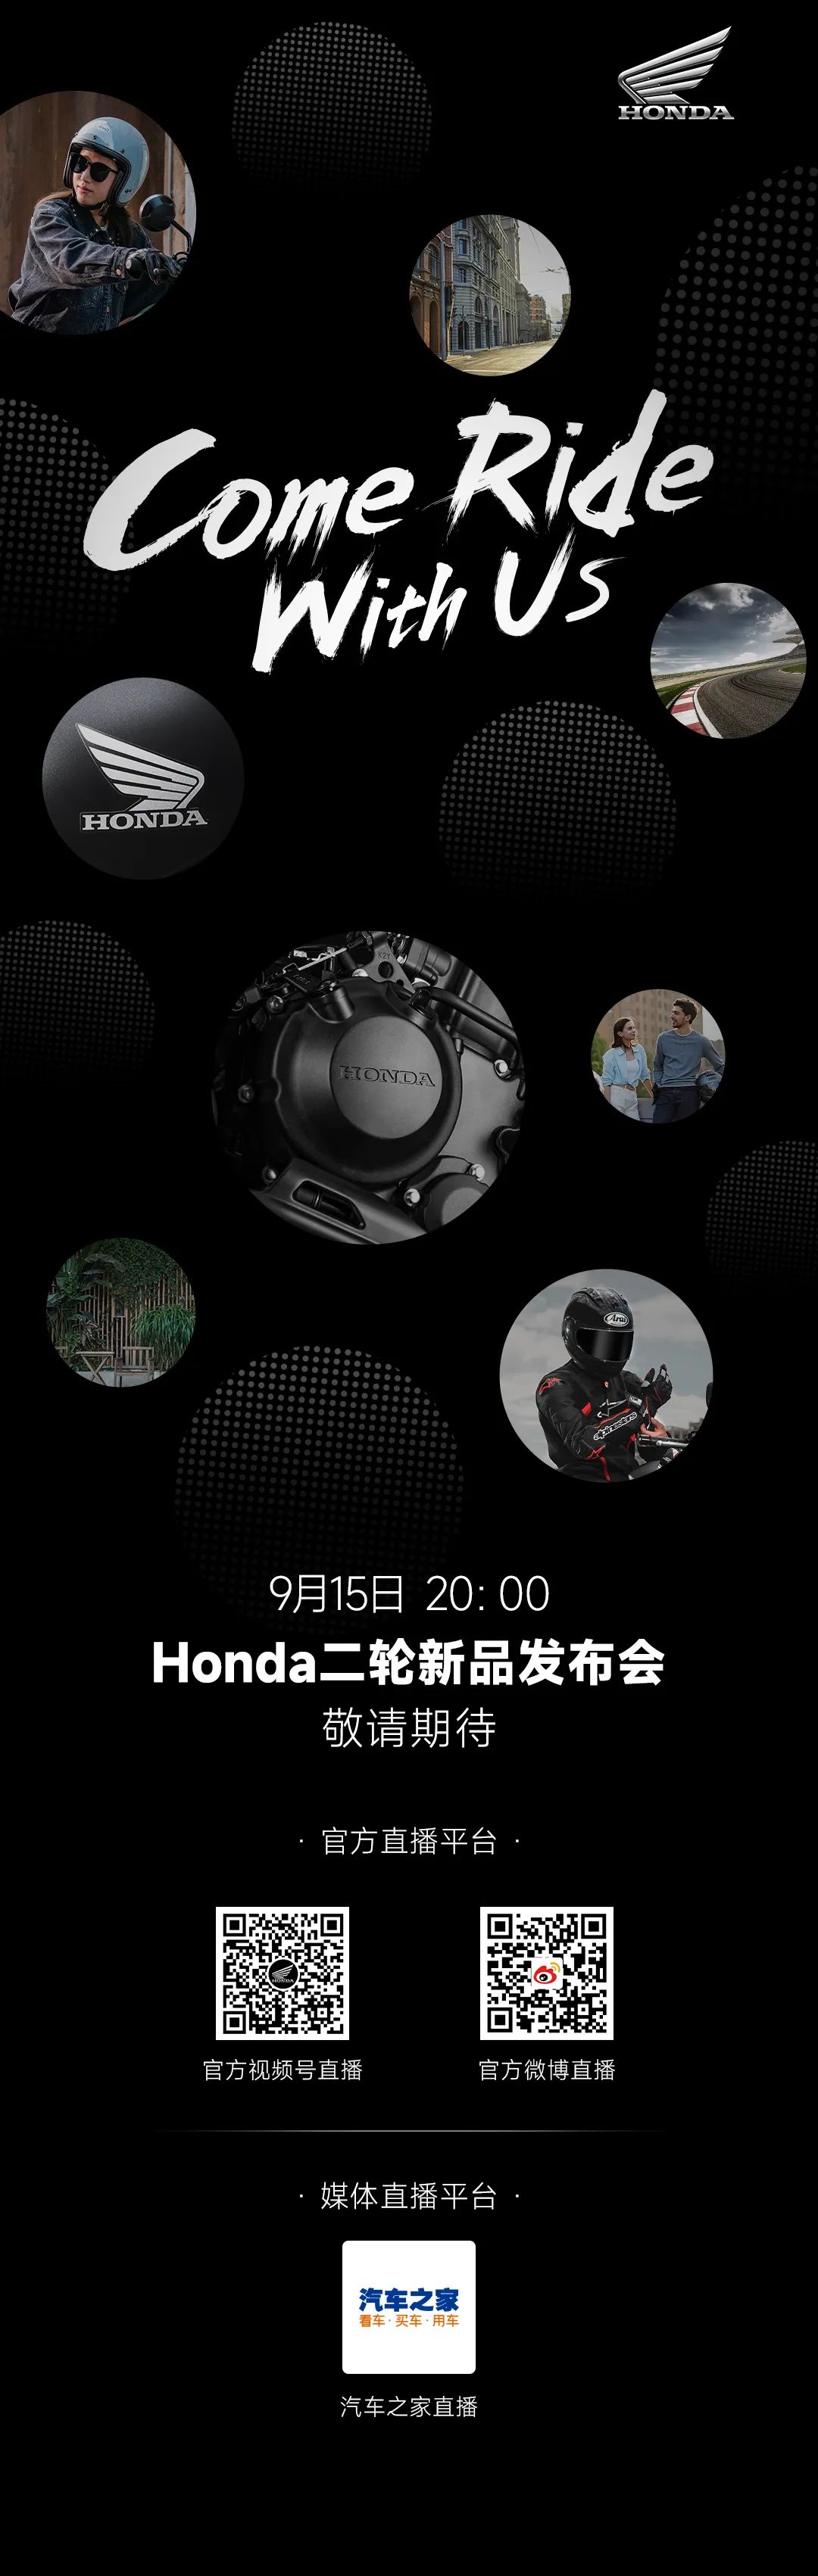 Come Ride With Us！Honda二輪新品發布會敬請期待！